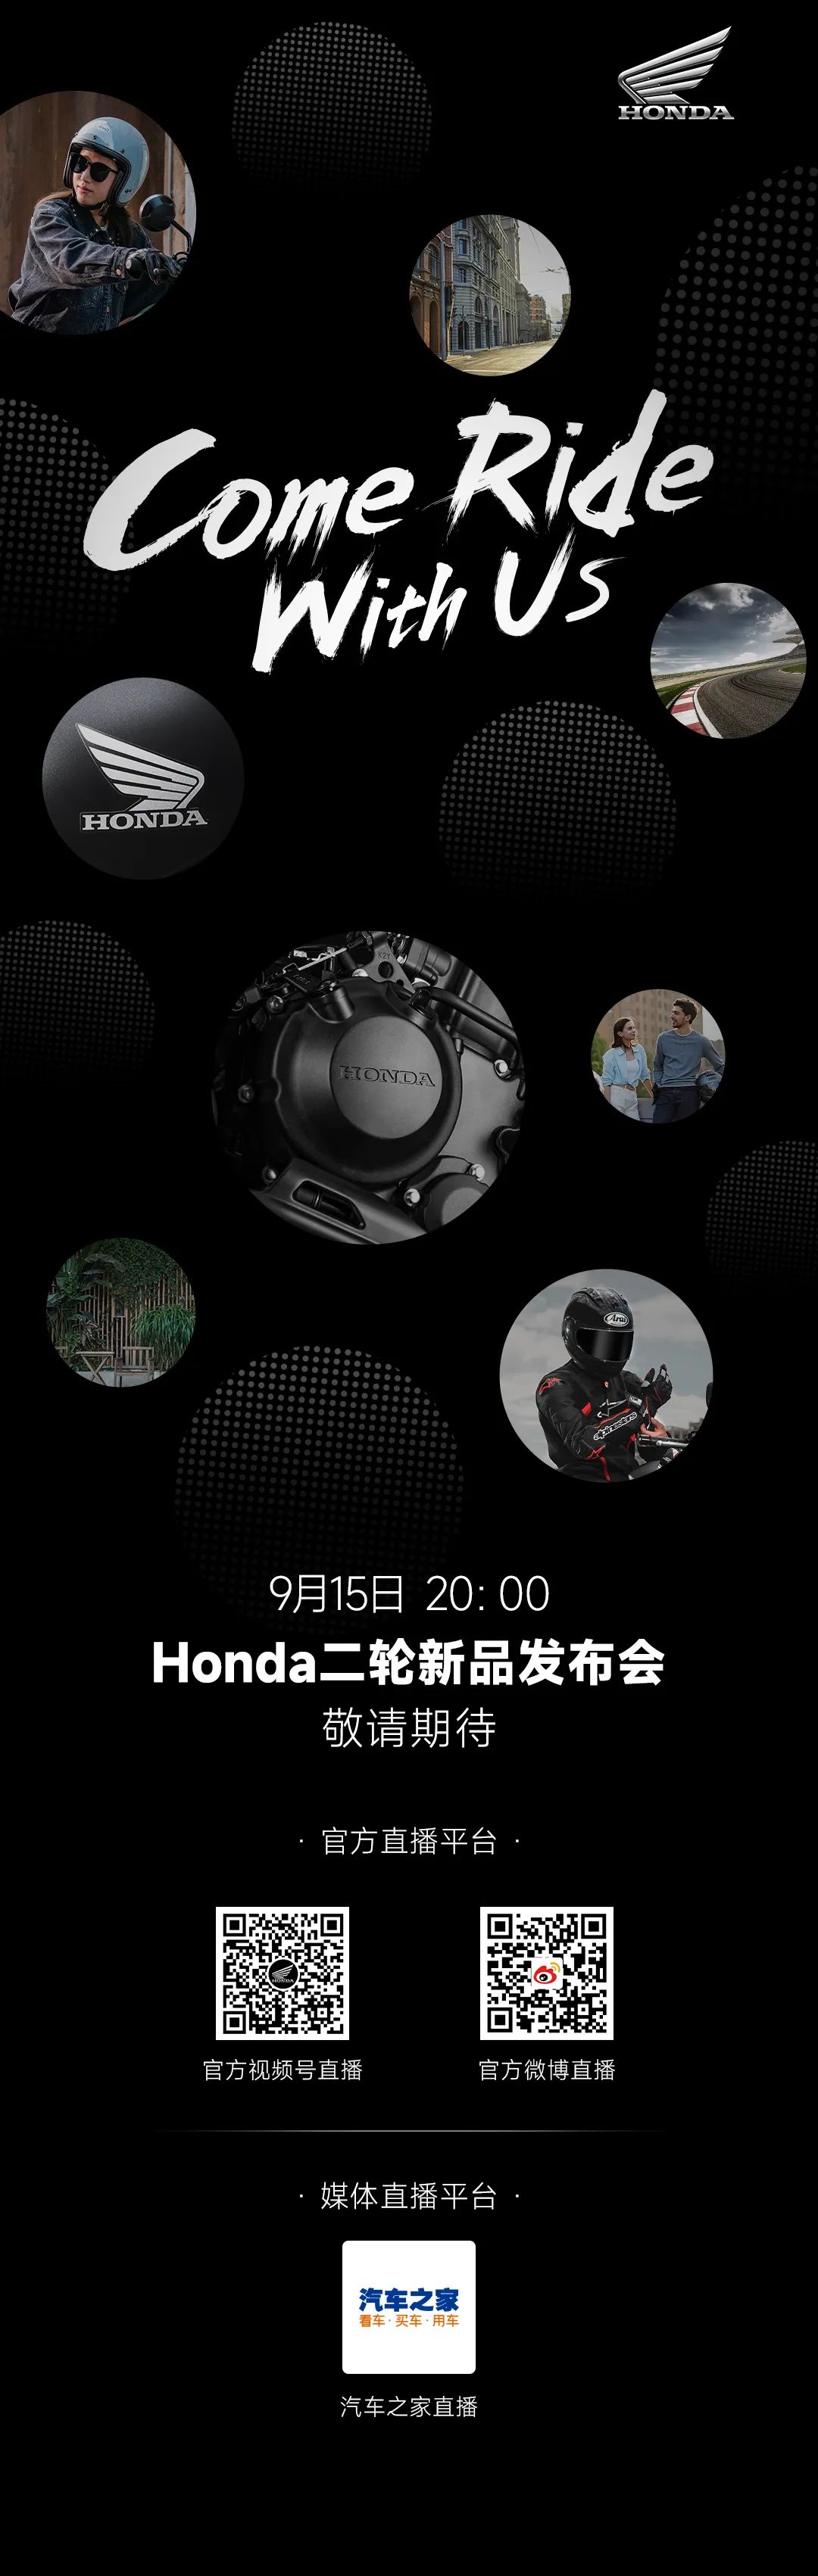 Come Ride With Us！Honda二輪新品發布會敬請期待！